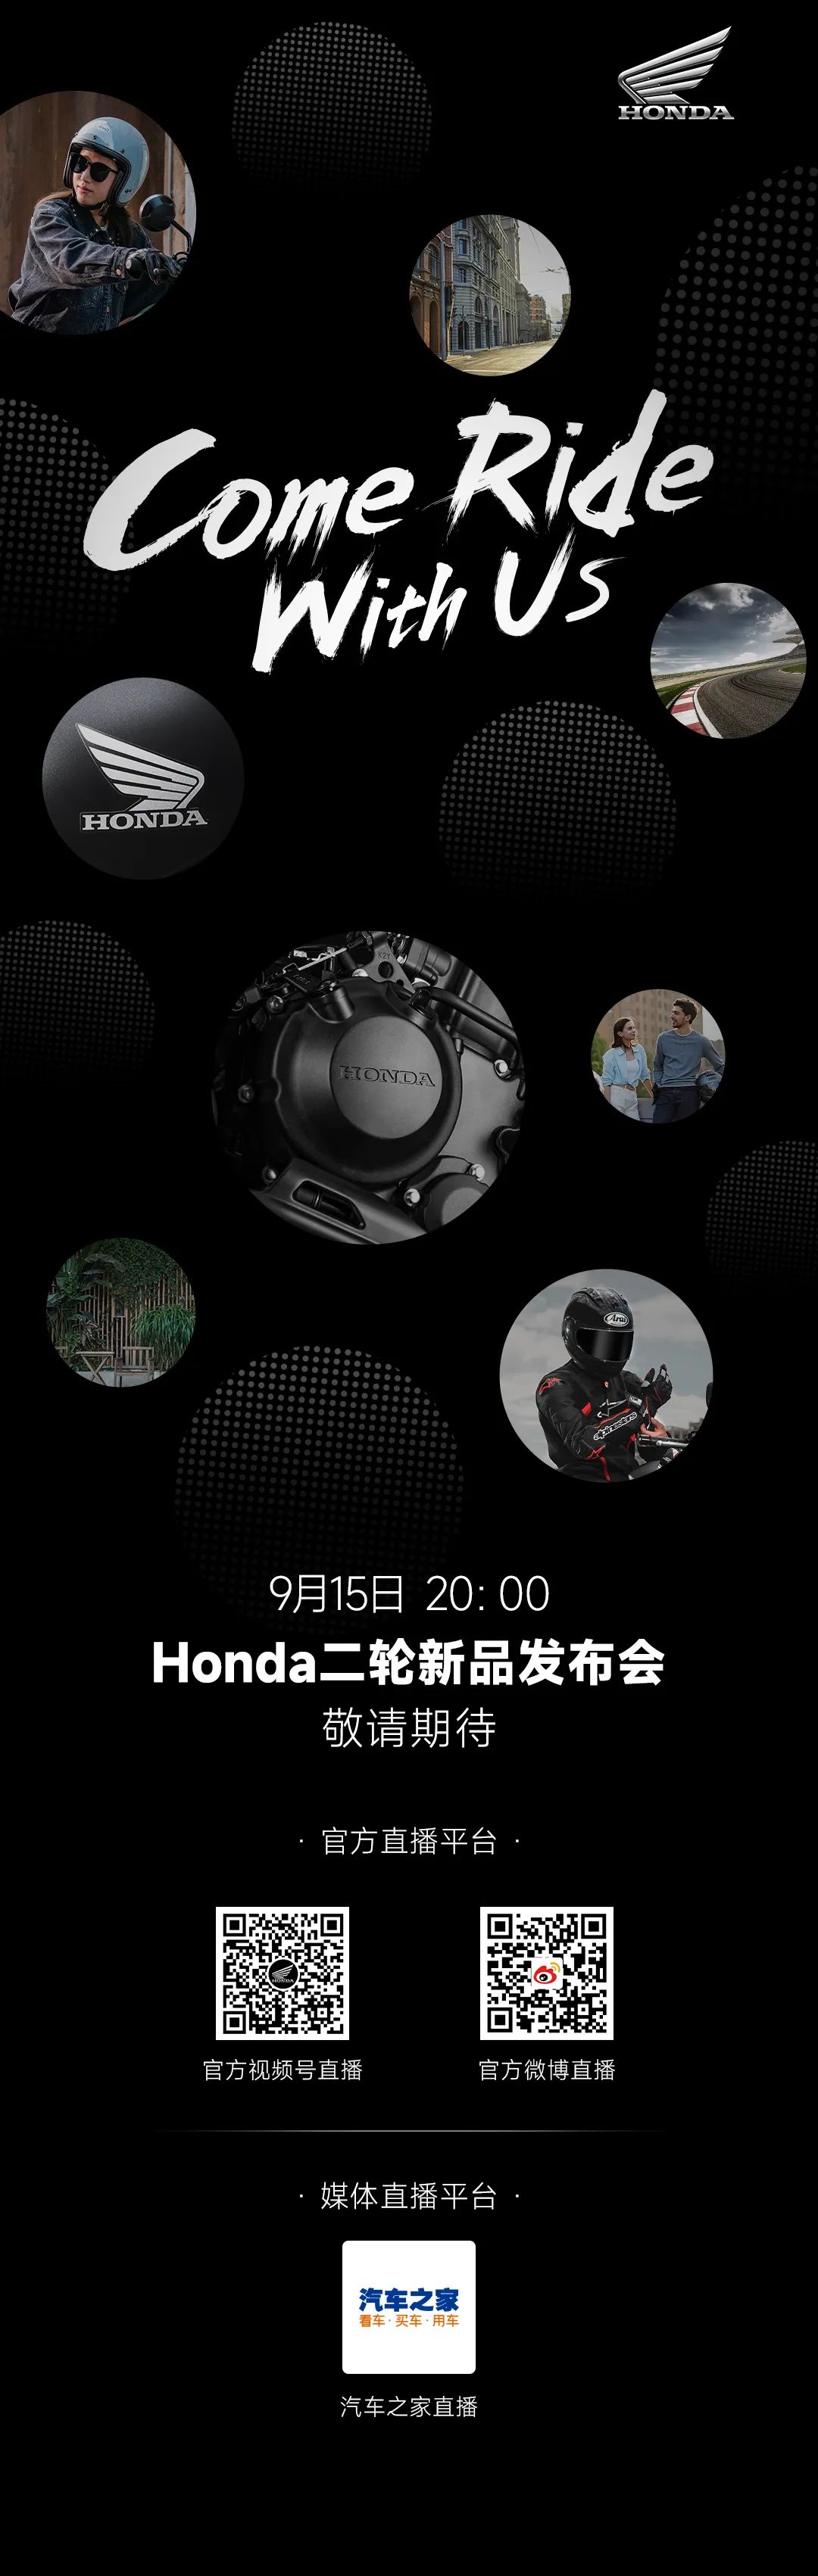 Come Ride With Us！Honda二輪新品發布會敬請期待！